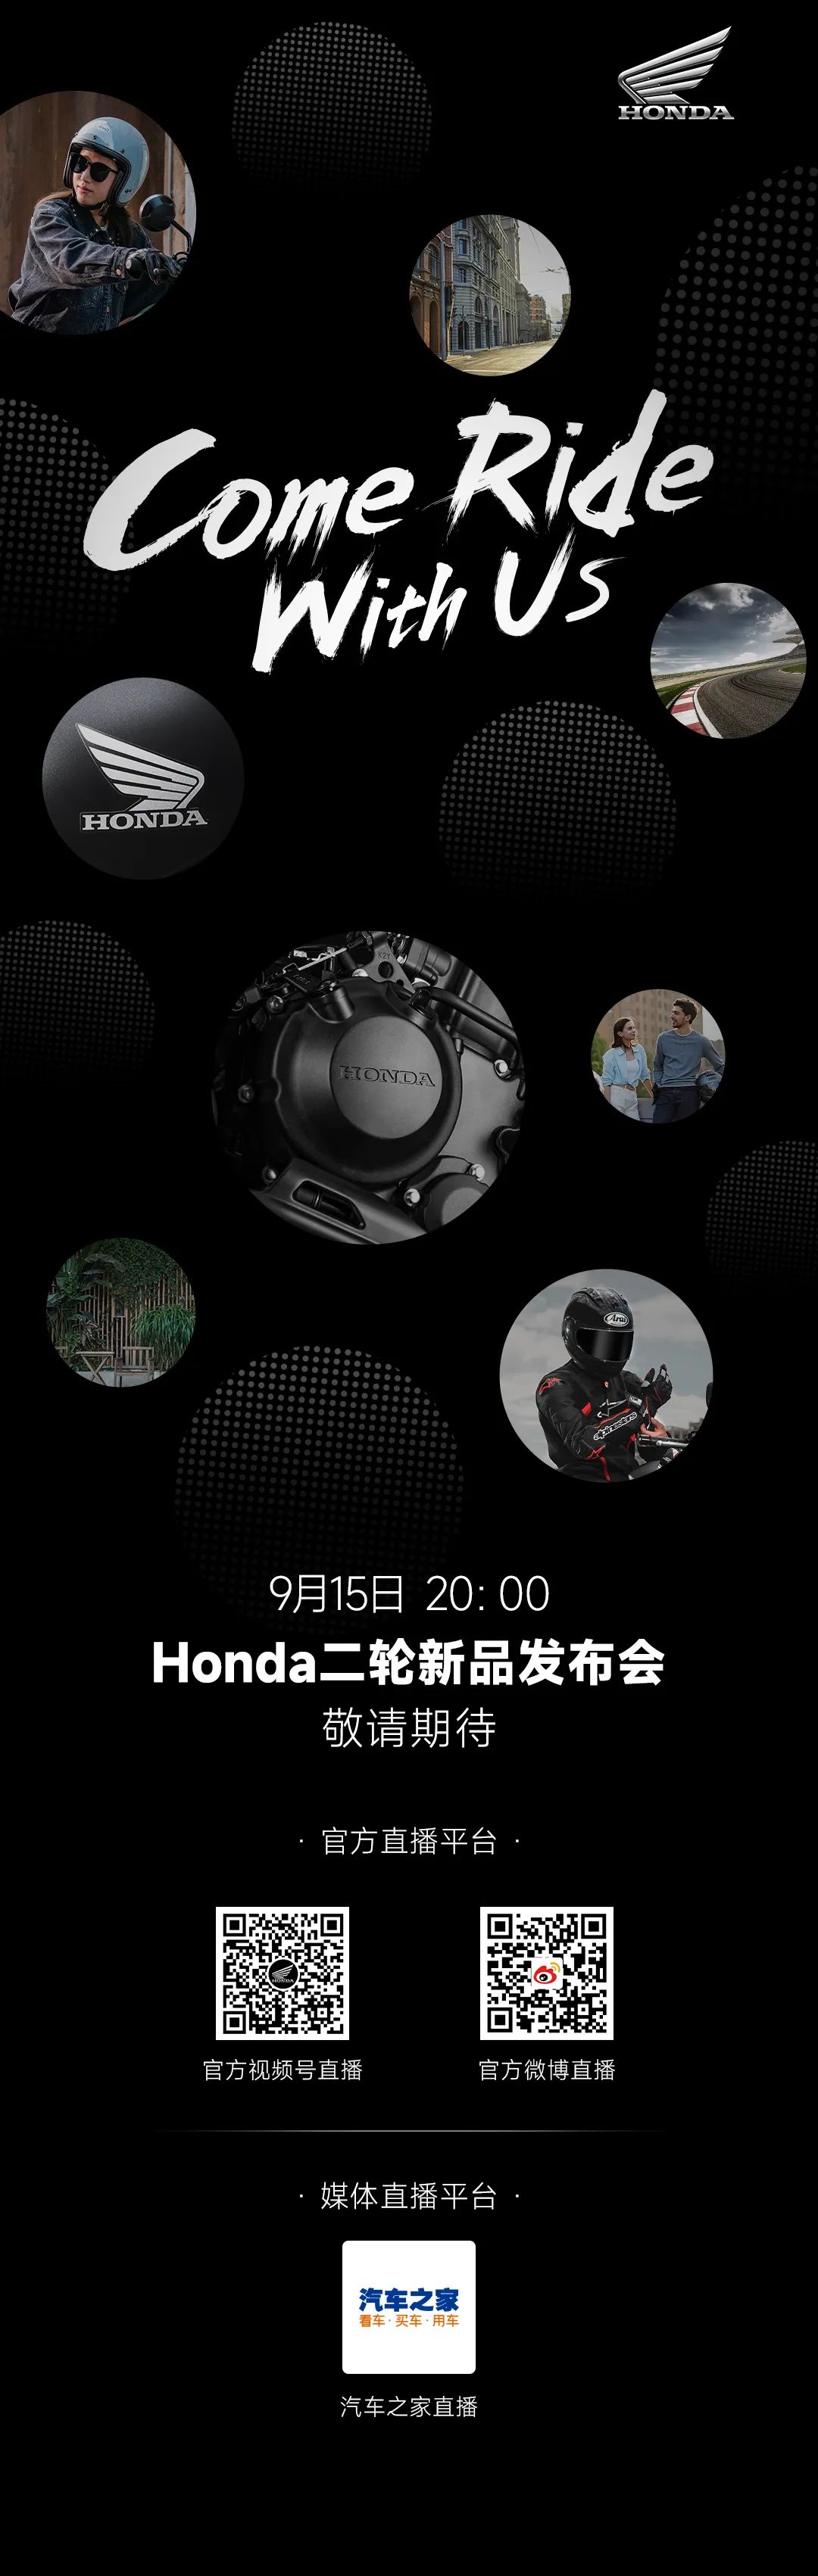 Come Ride With Us！Honda二輪新品發布會敬請期待！